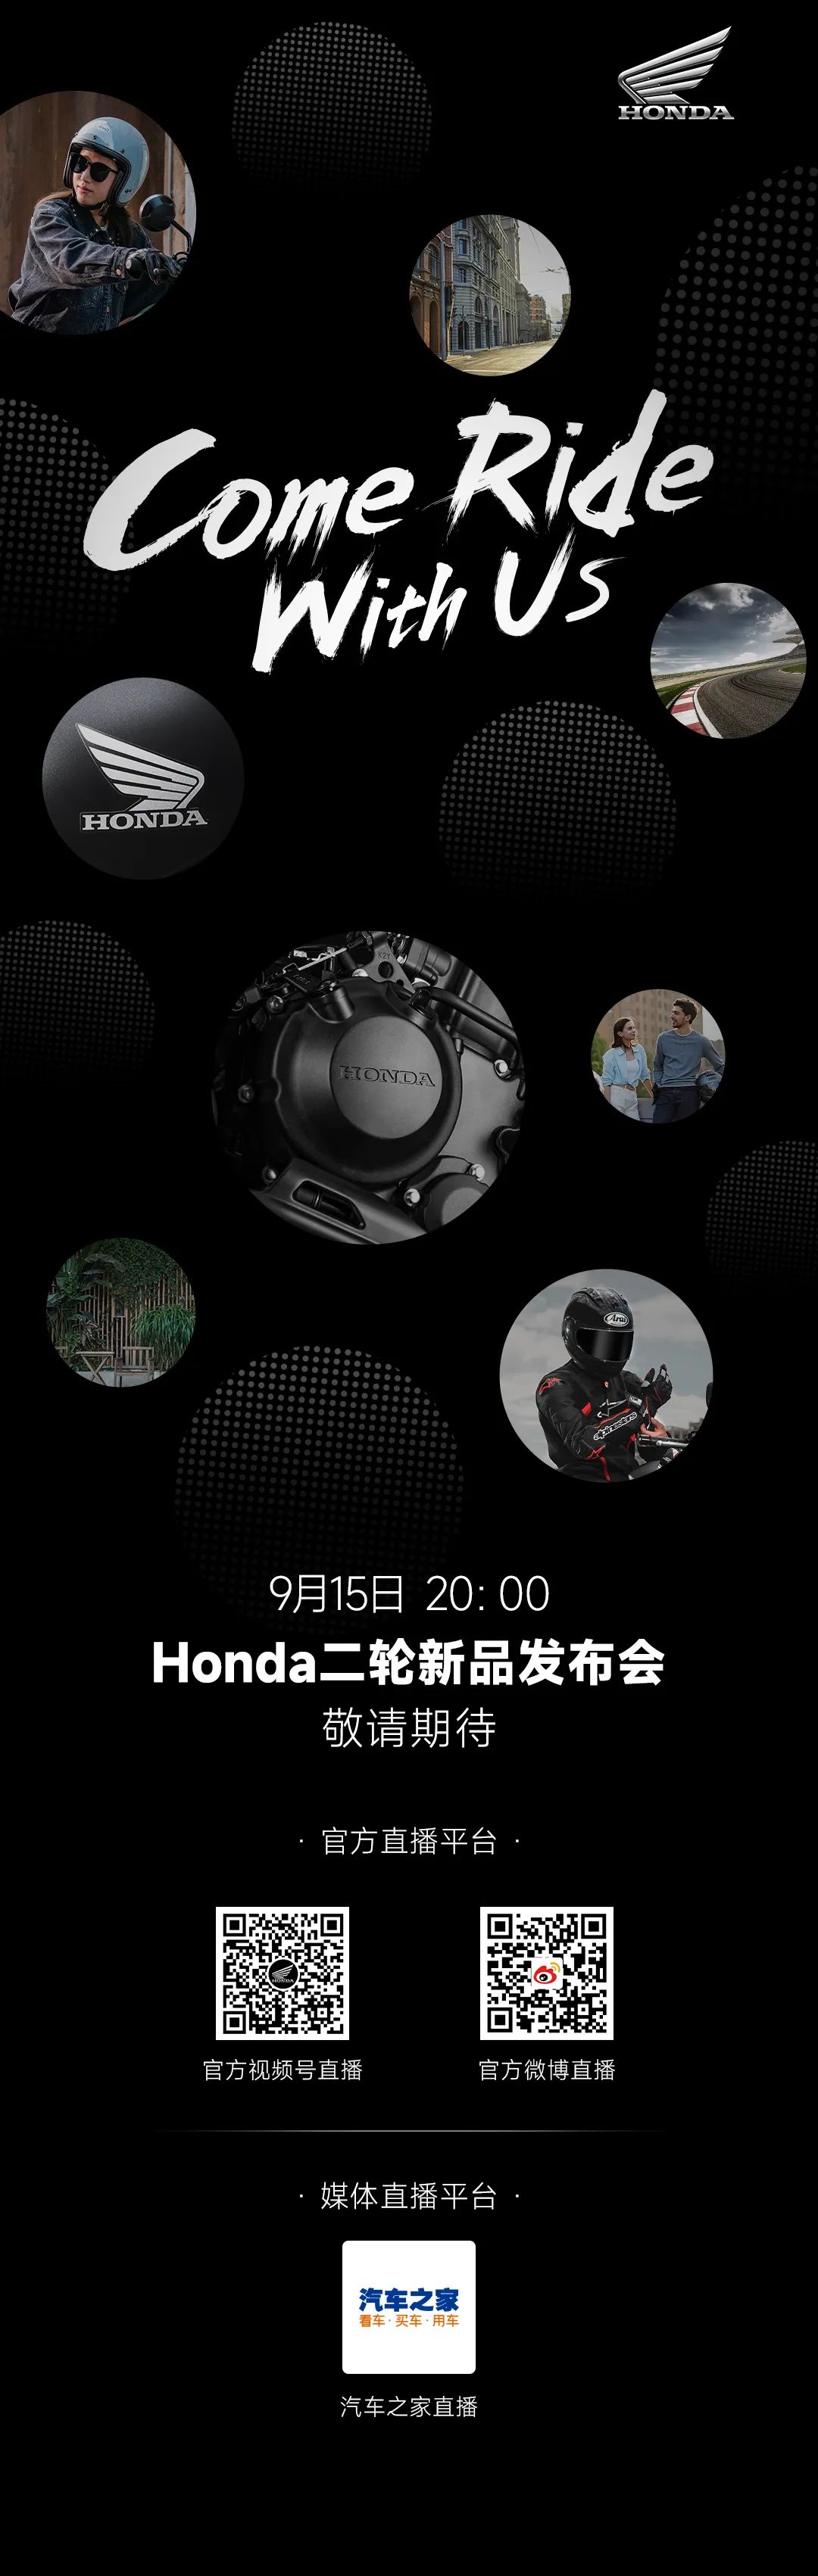 Come Ride With Us！Honda二輪新品發布會敬請期待！